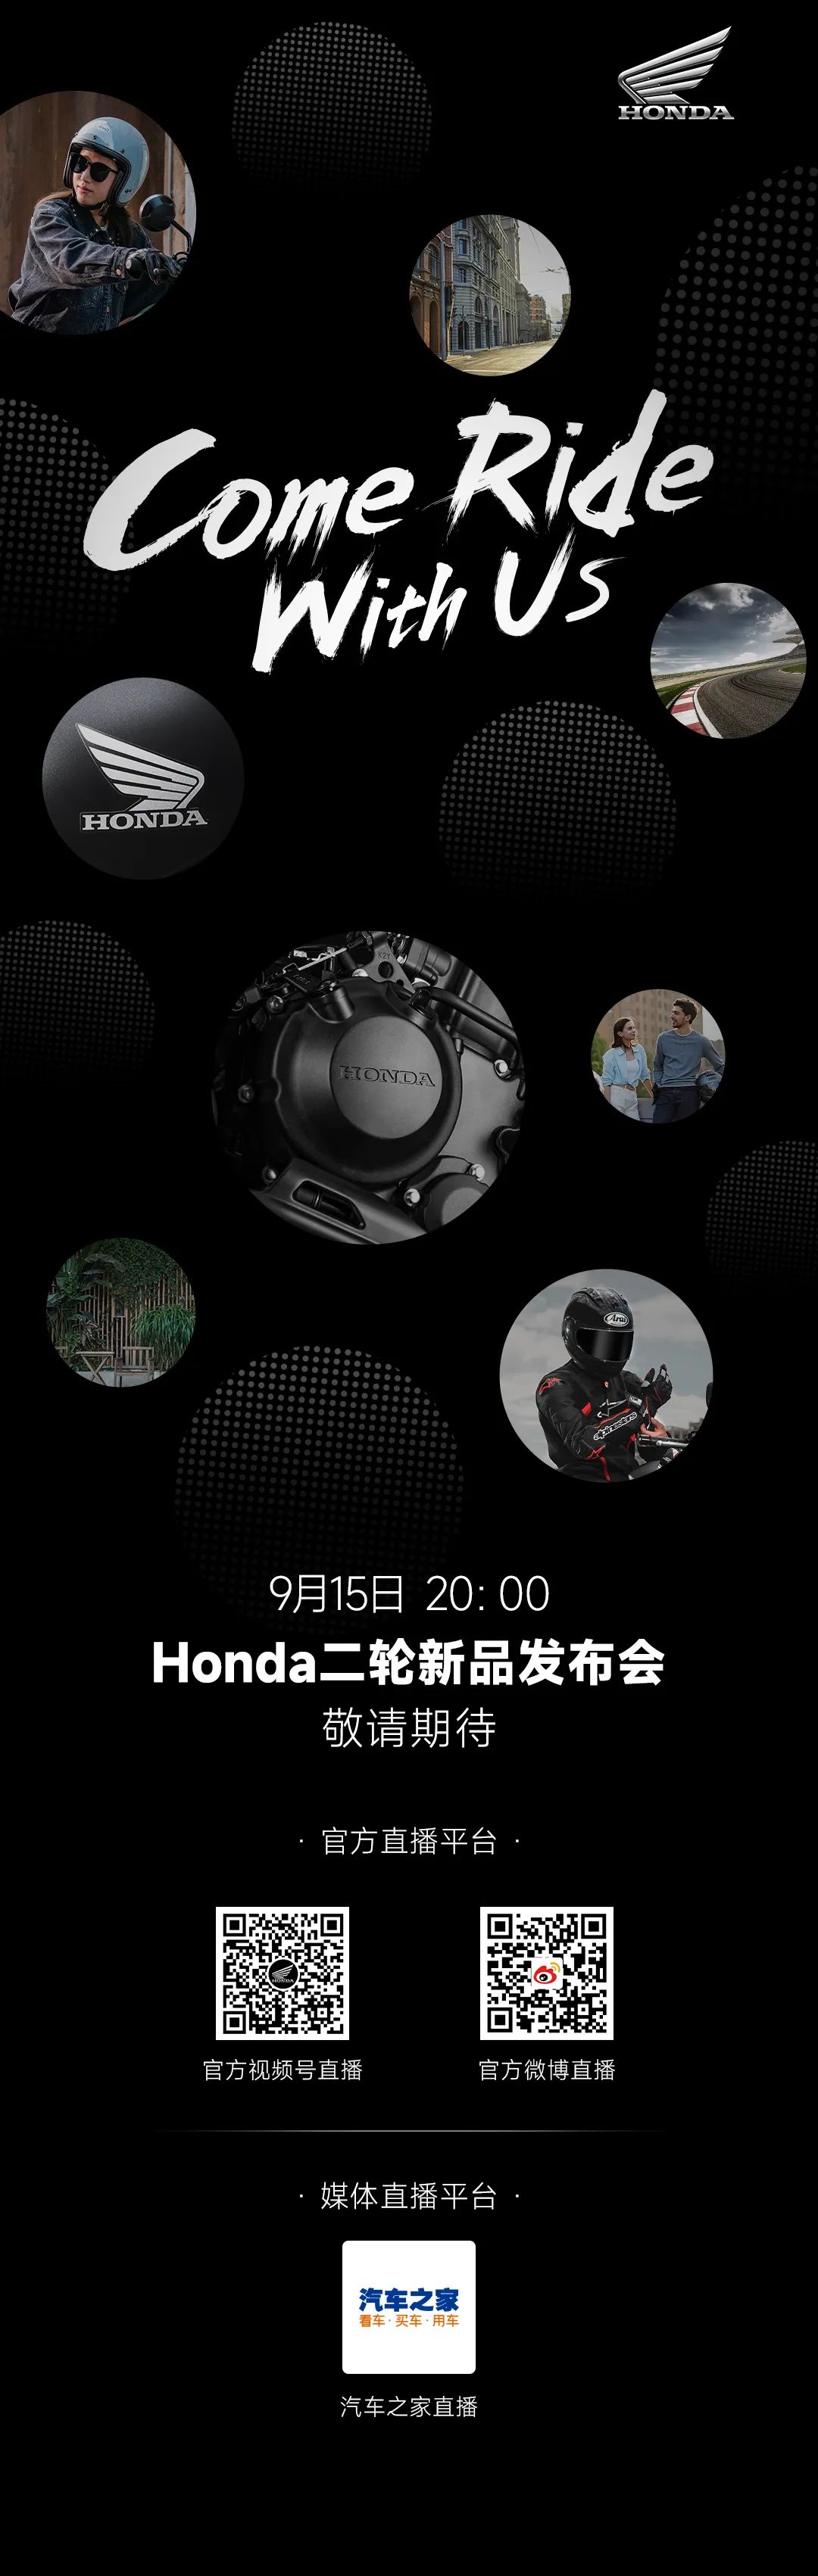 Come Ride With Us！Honda二輪新品發布會敬請期待！